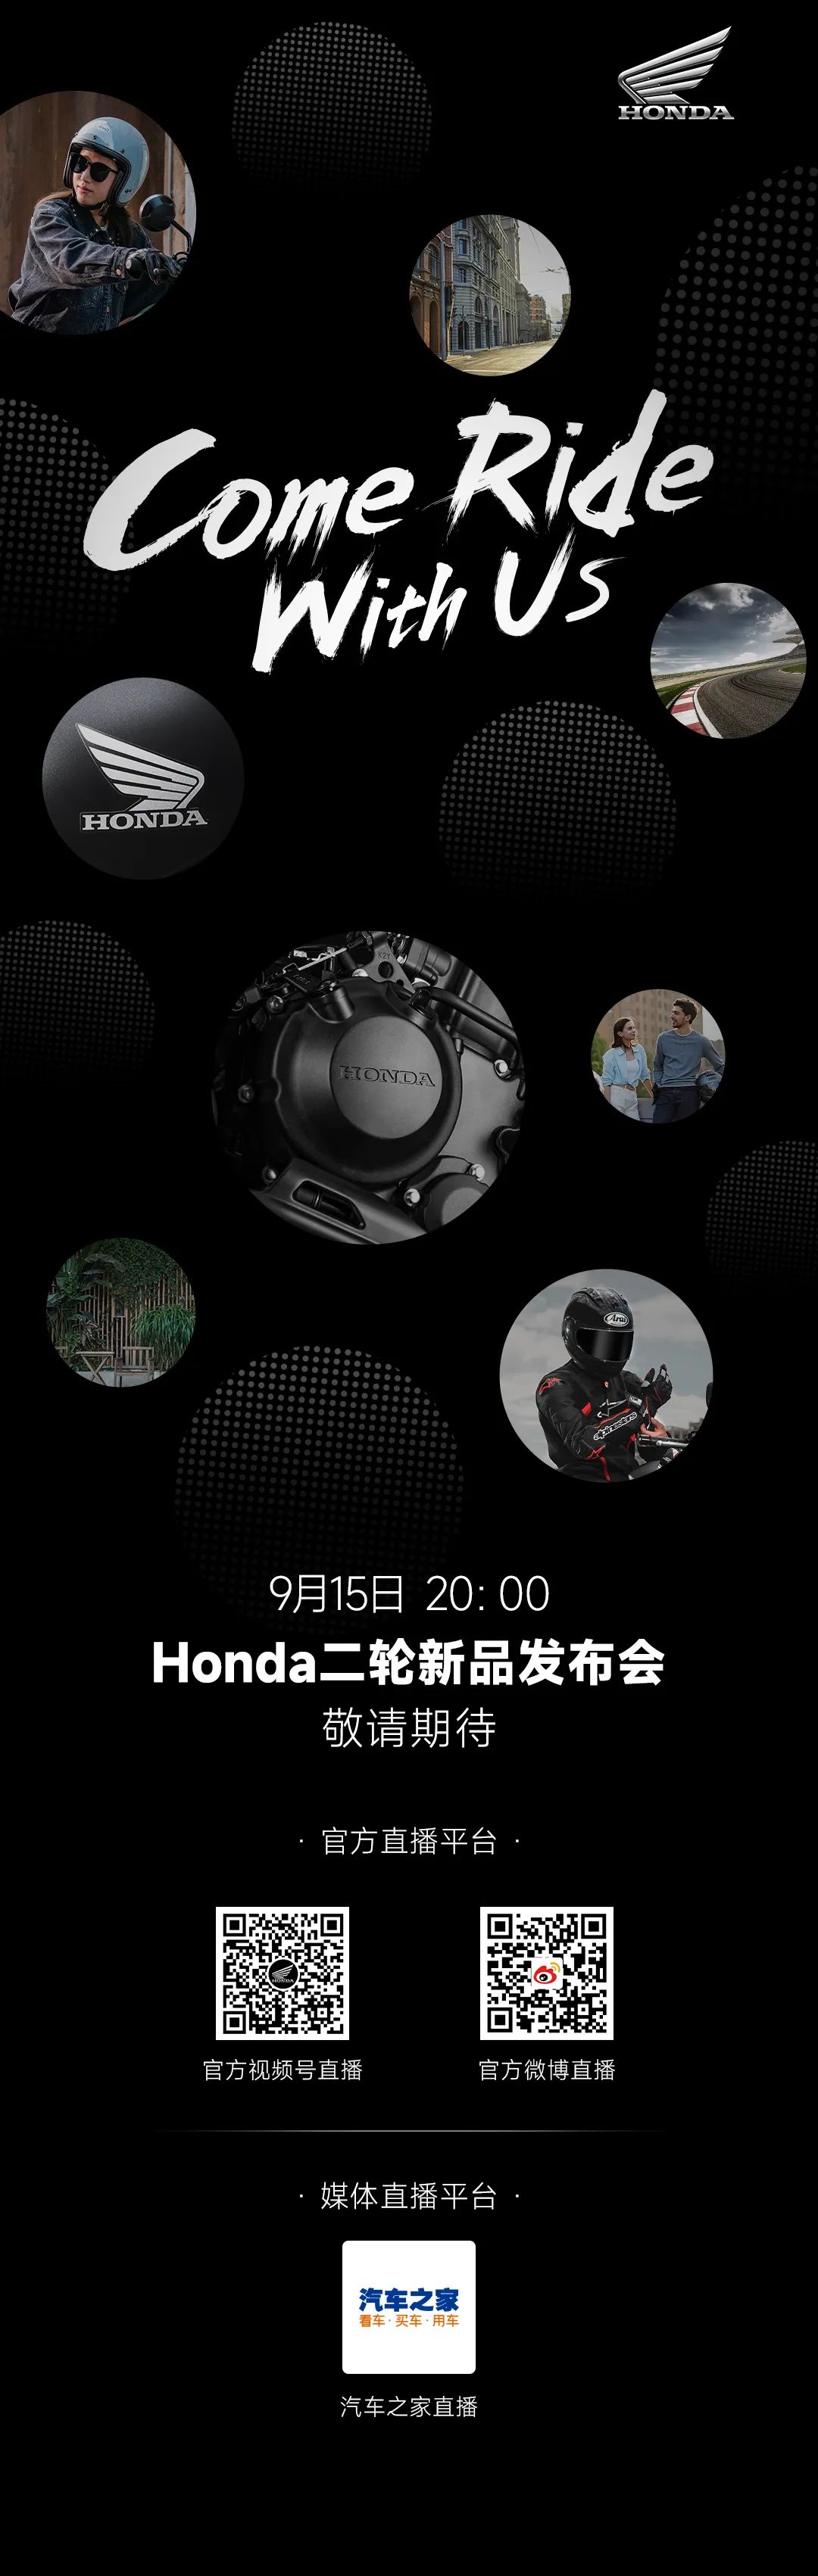 Come Ride With Us！Honda二輪新品發布會敬請期待！